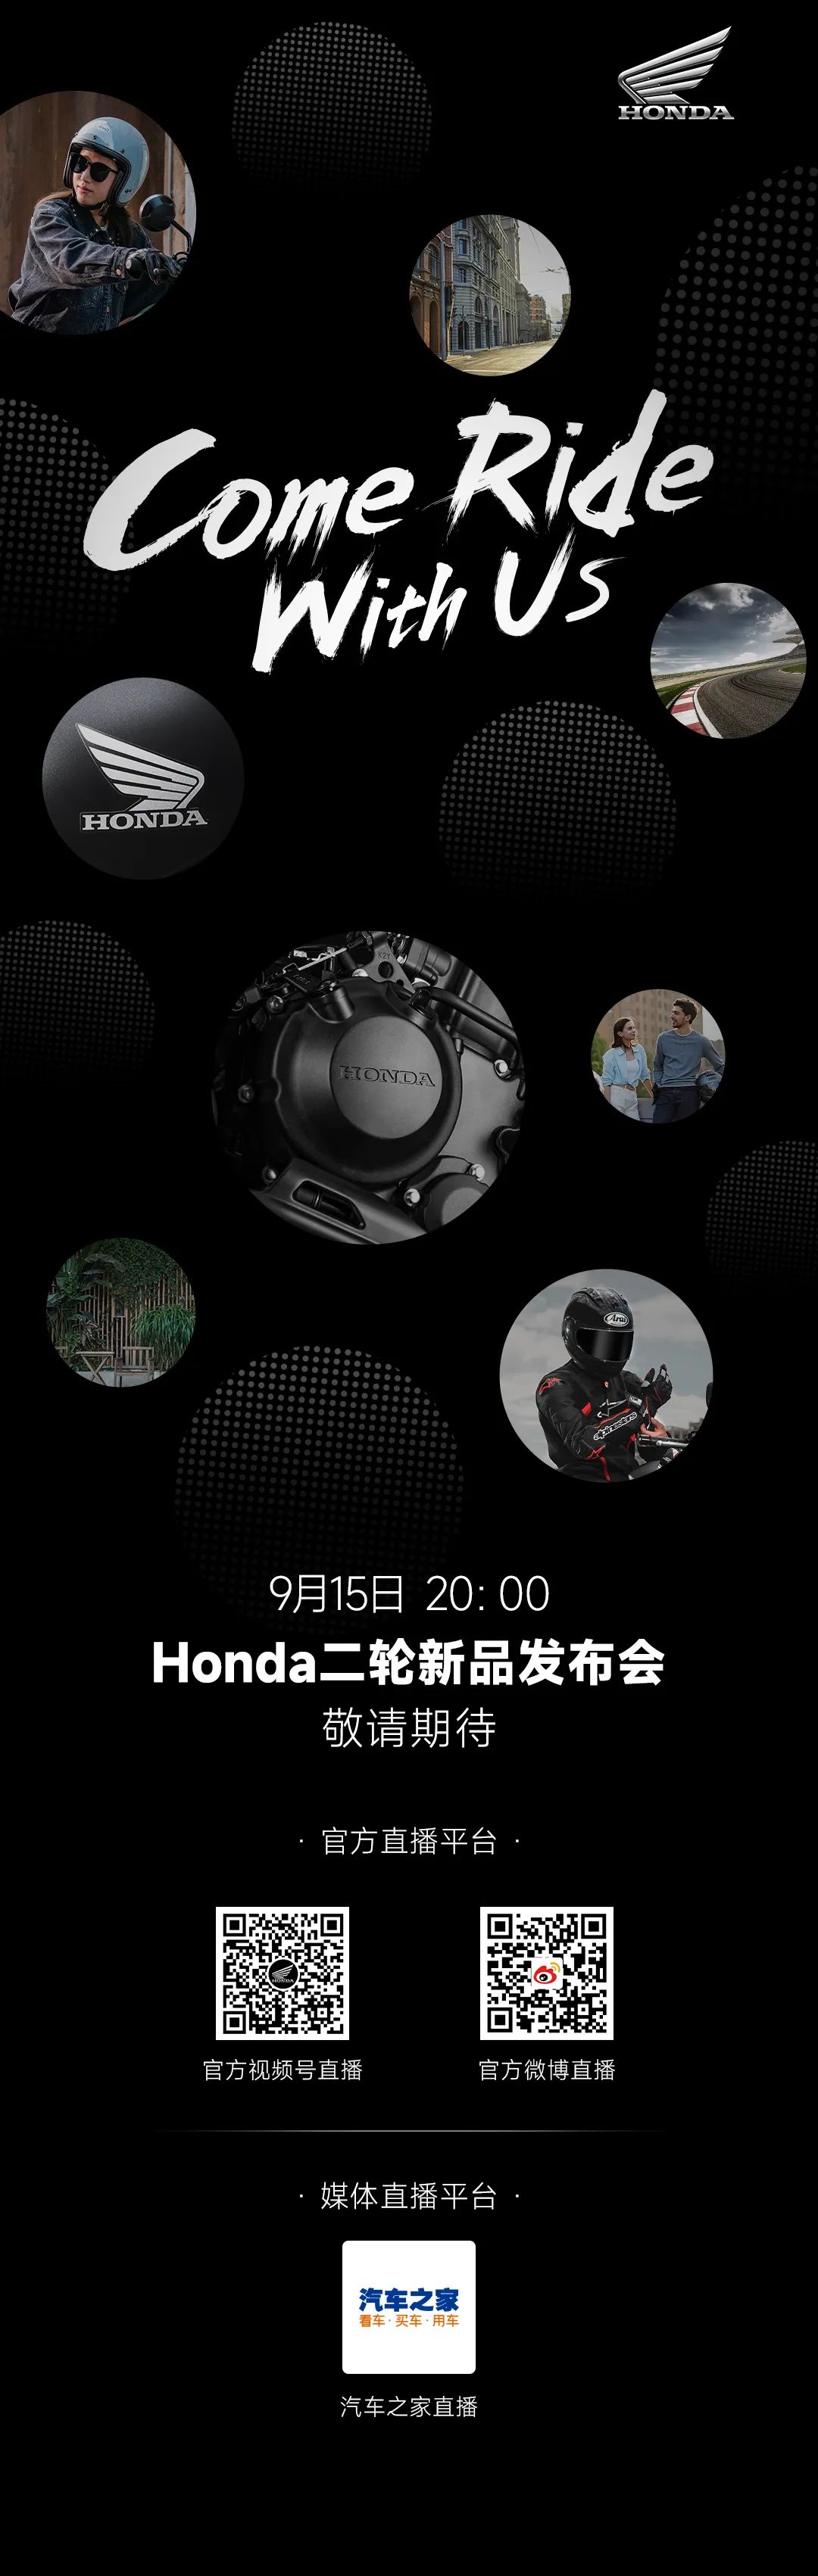 Come Ride With Us！Honda二輪新品發布會敬請期待！